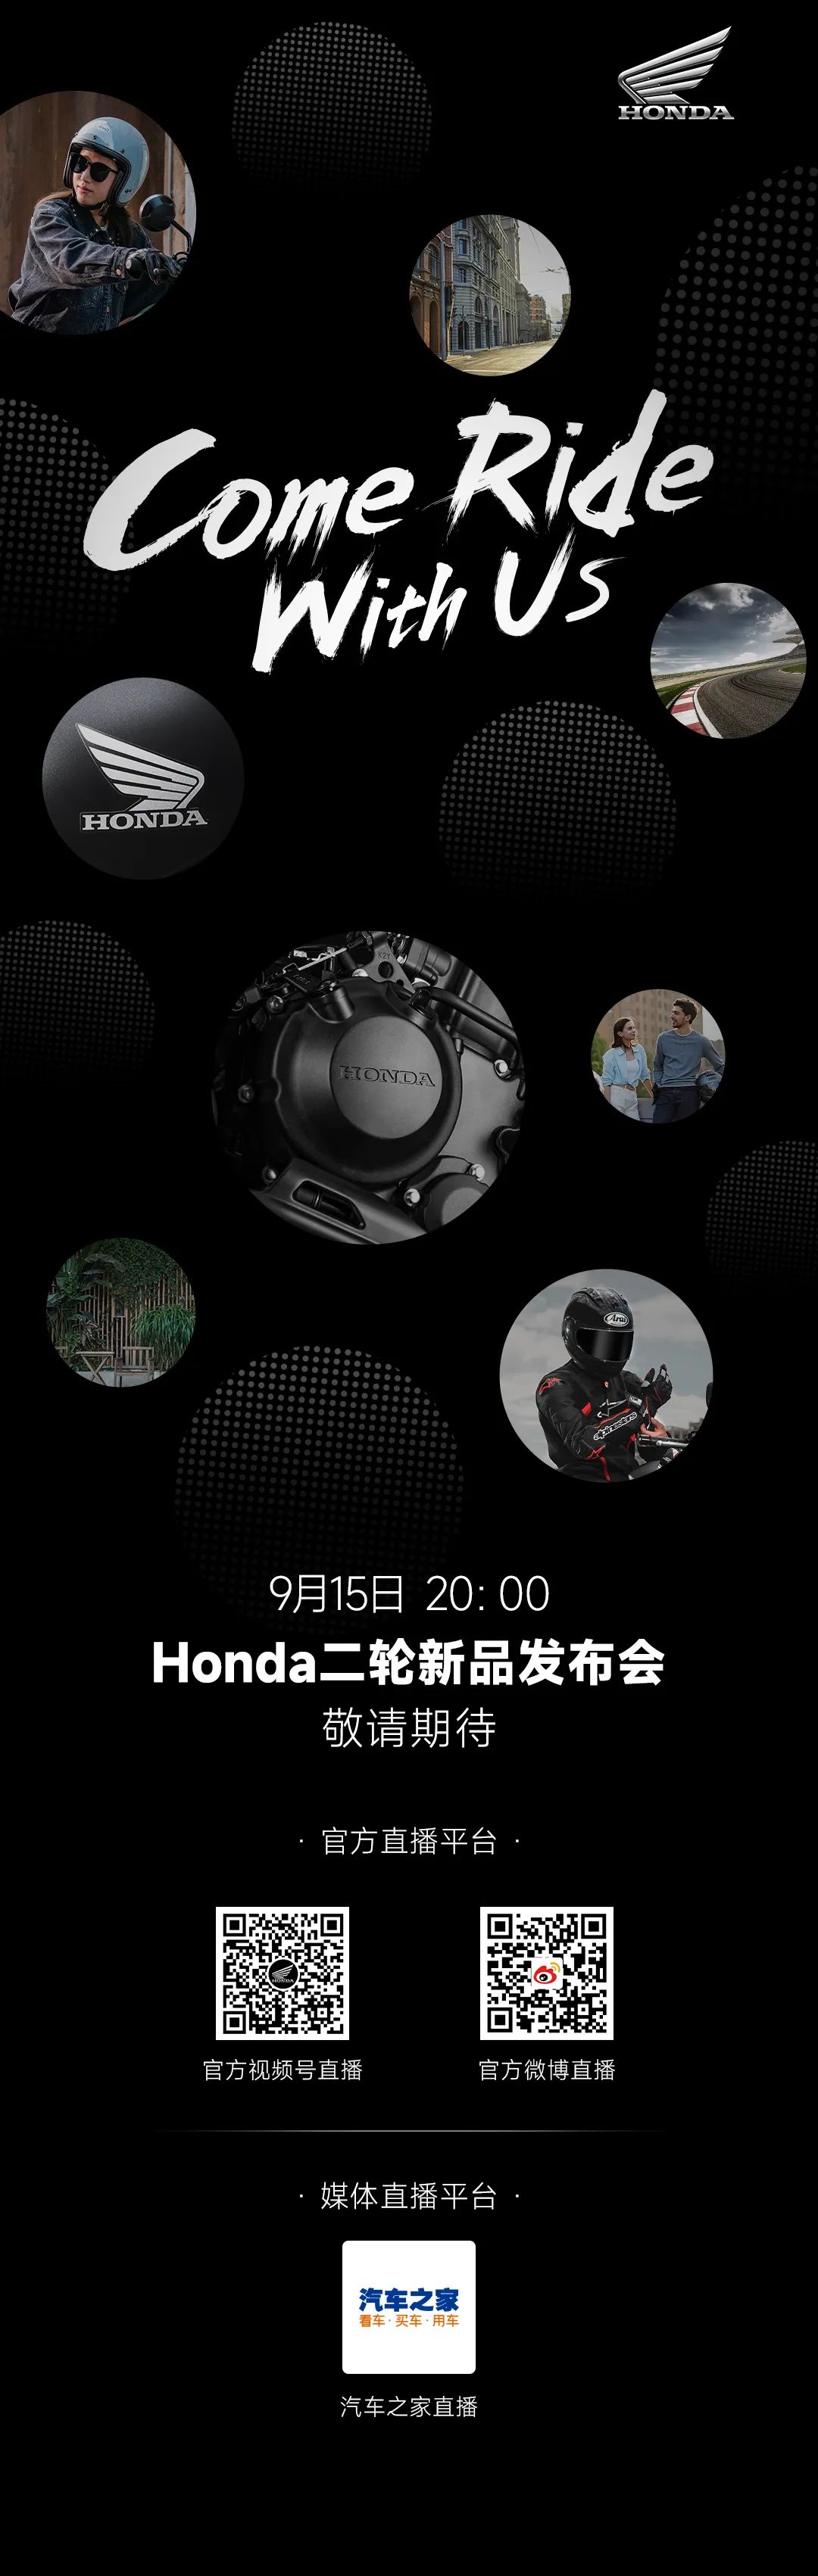 Come Ride With Us！Honda二輪新品發布會敬請期待！